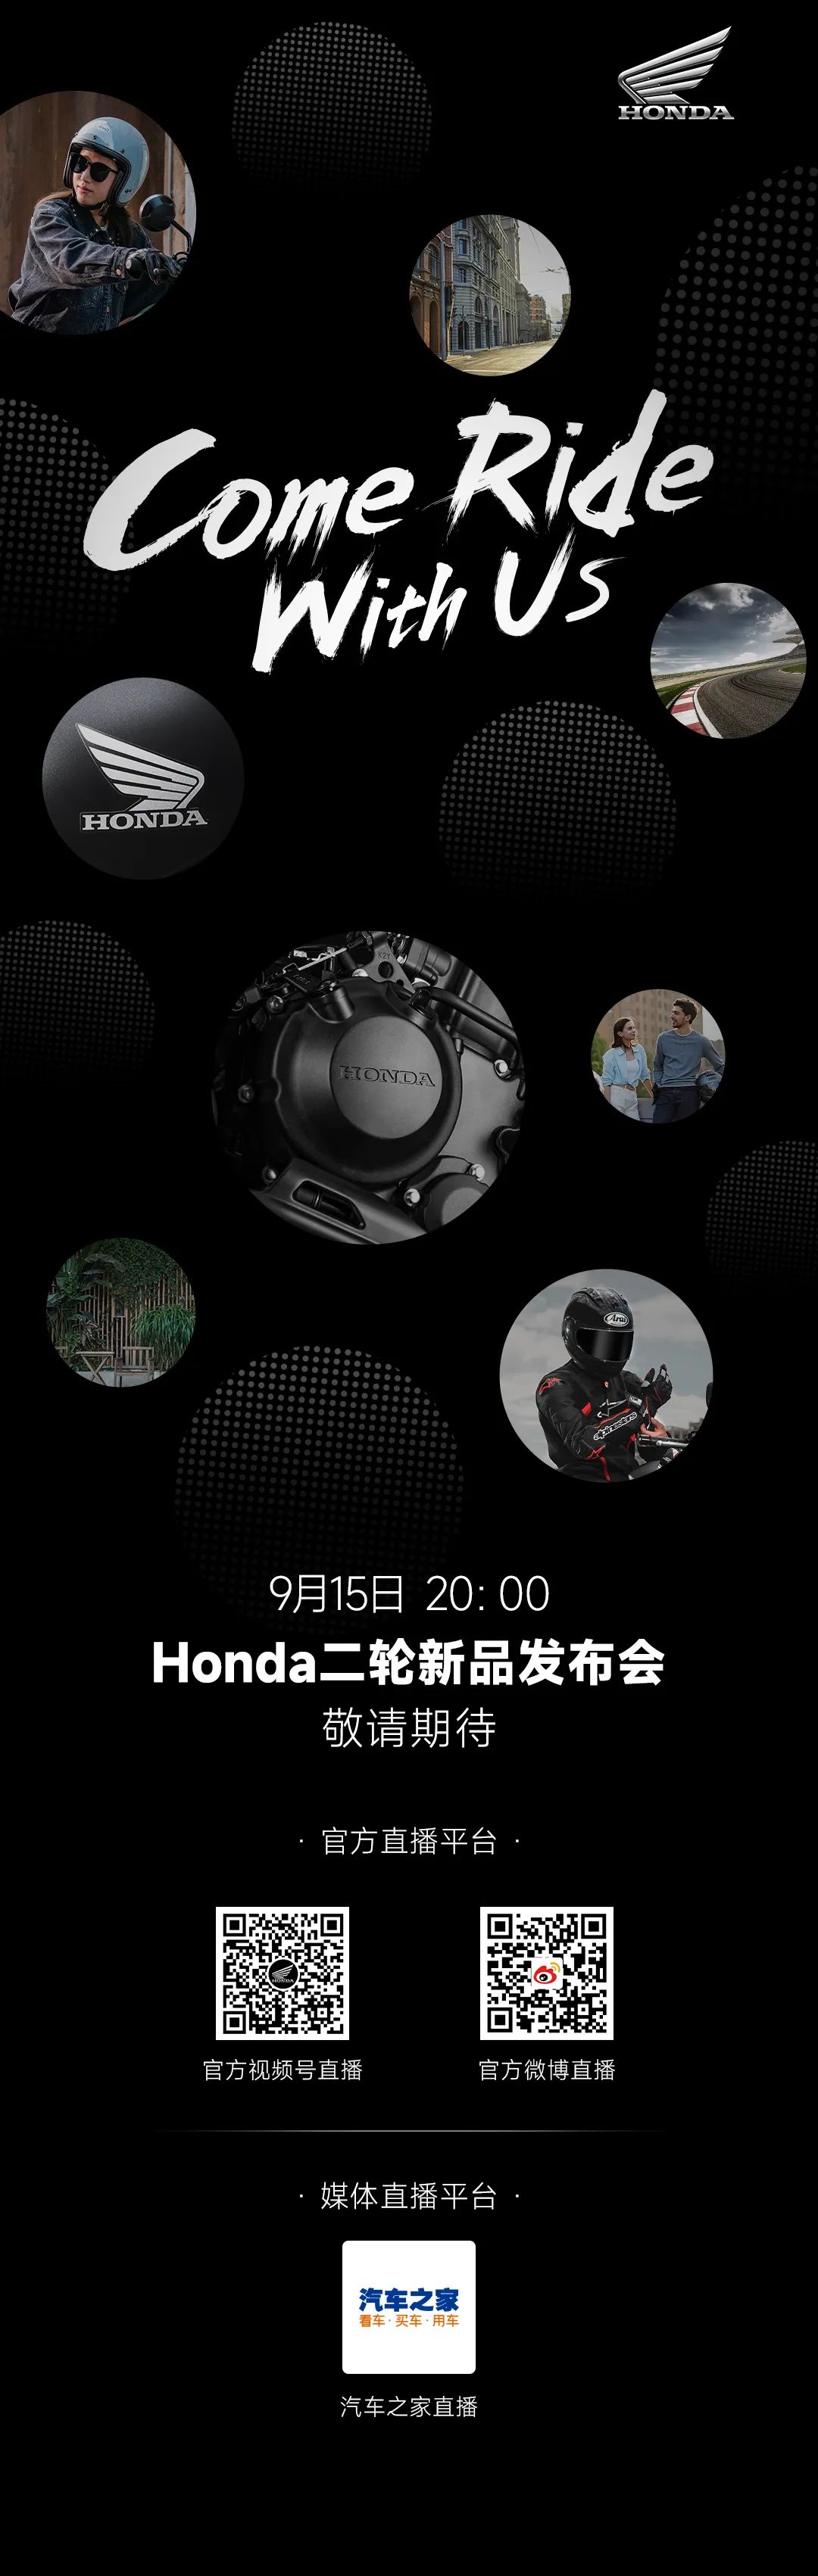 Come Ride With Us！Honda二輪新品發布會敬請期待！